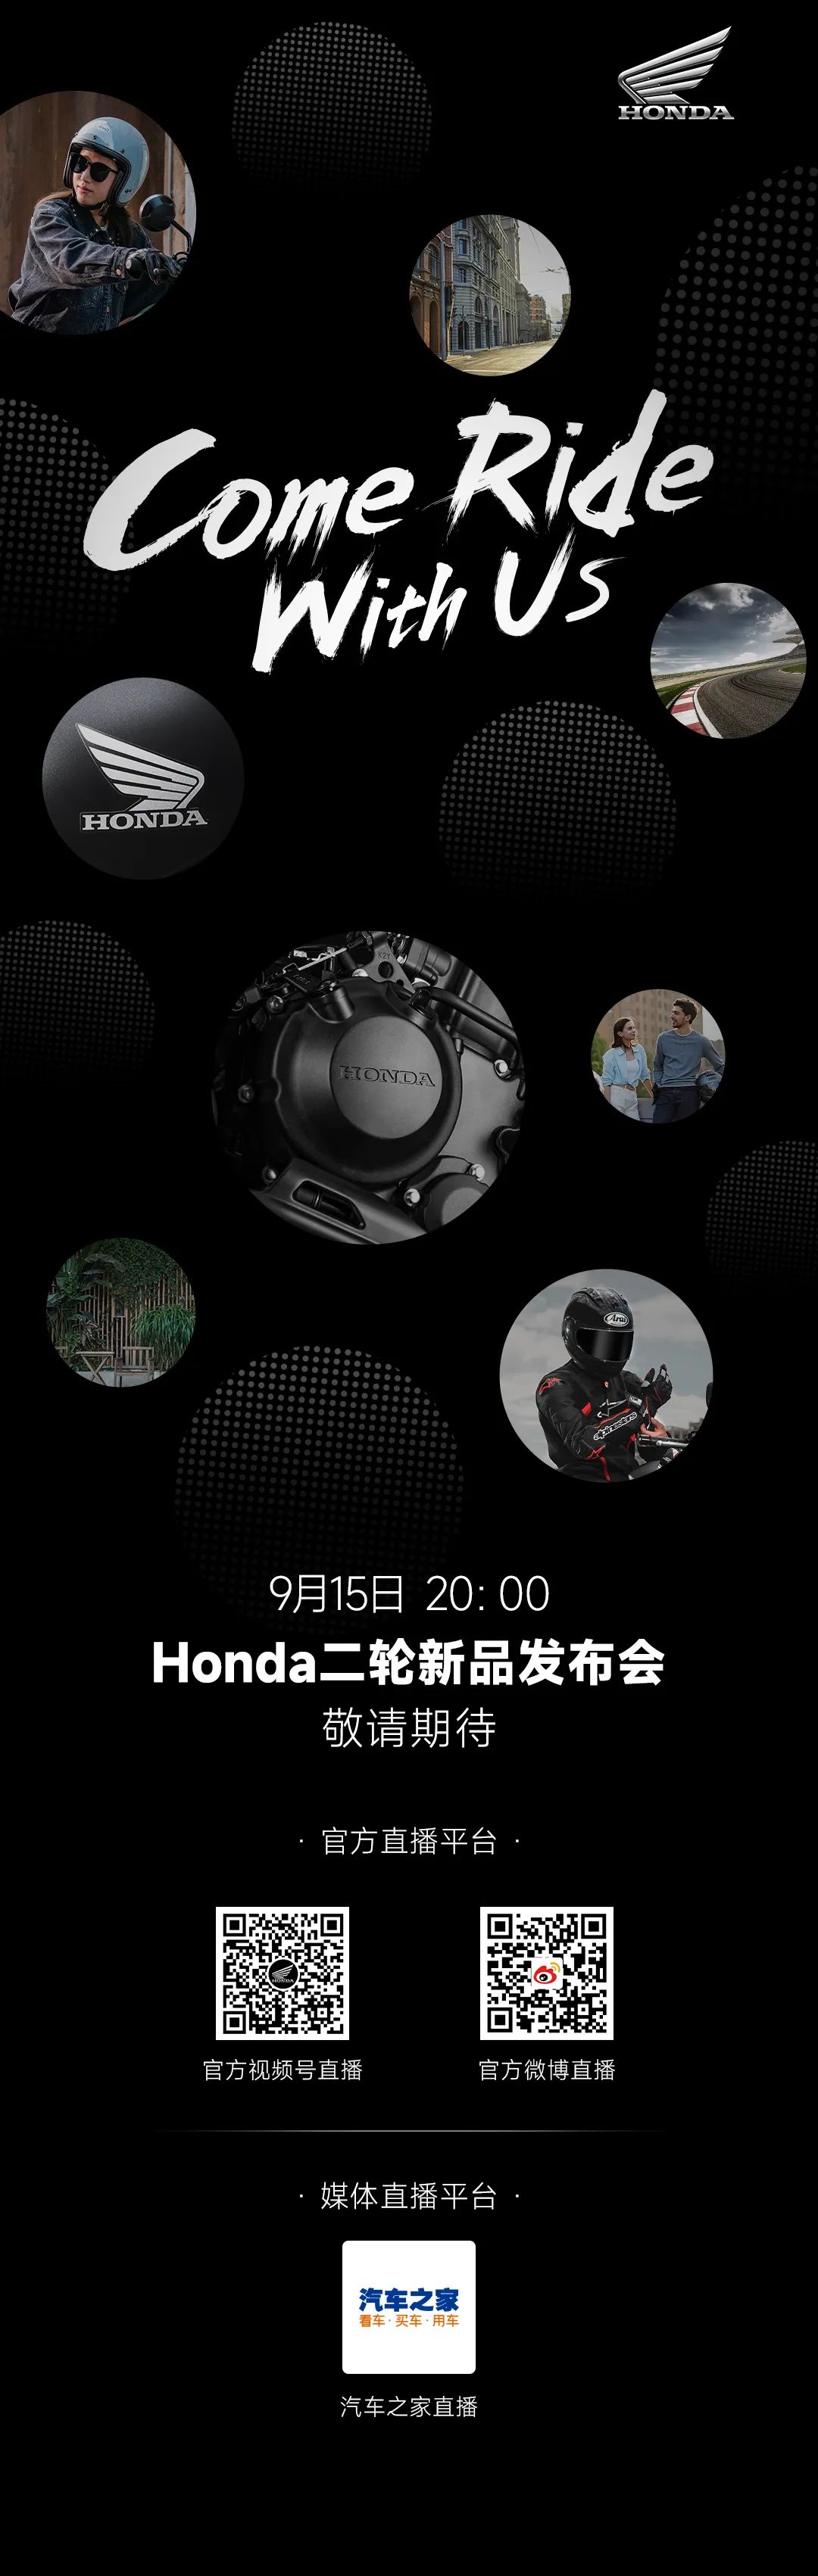 Come Ride With Us！Honda二輪新品發布會敬請期待！